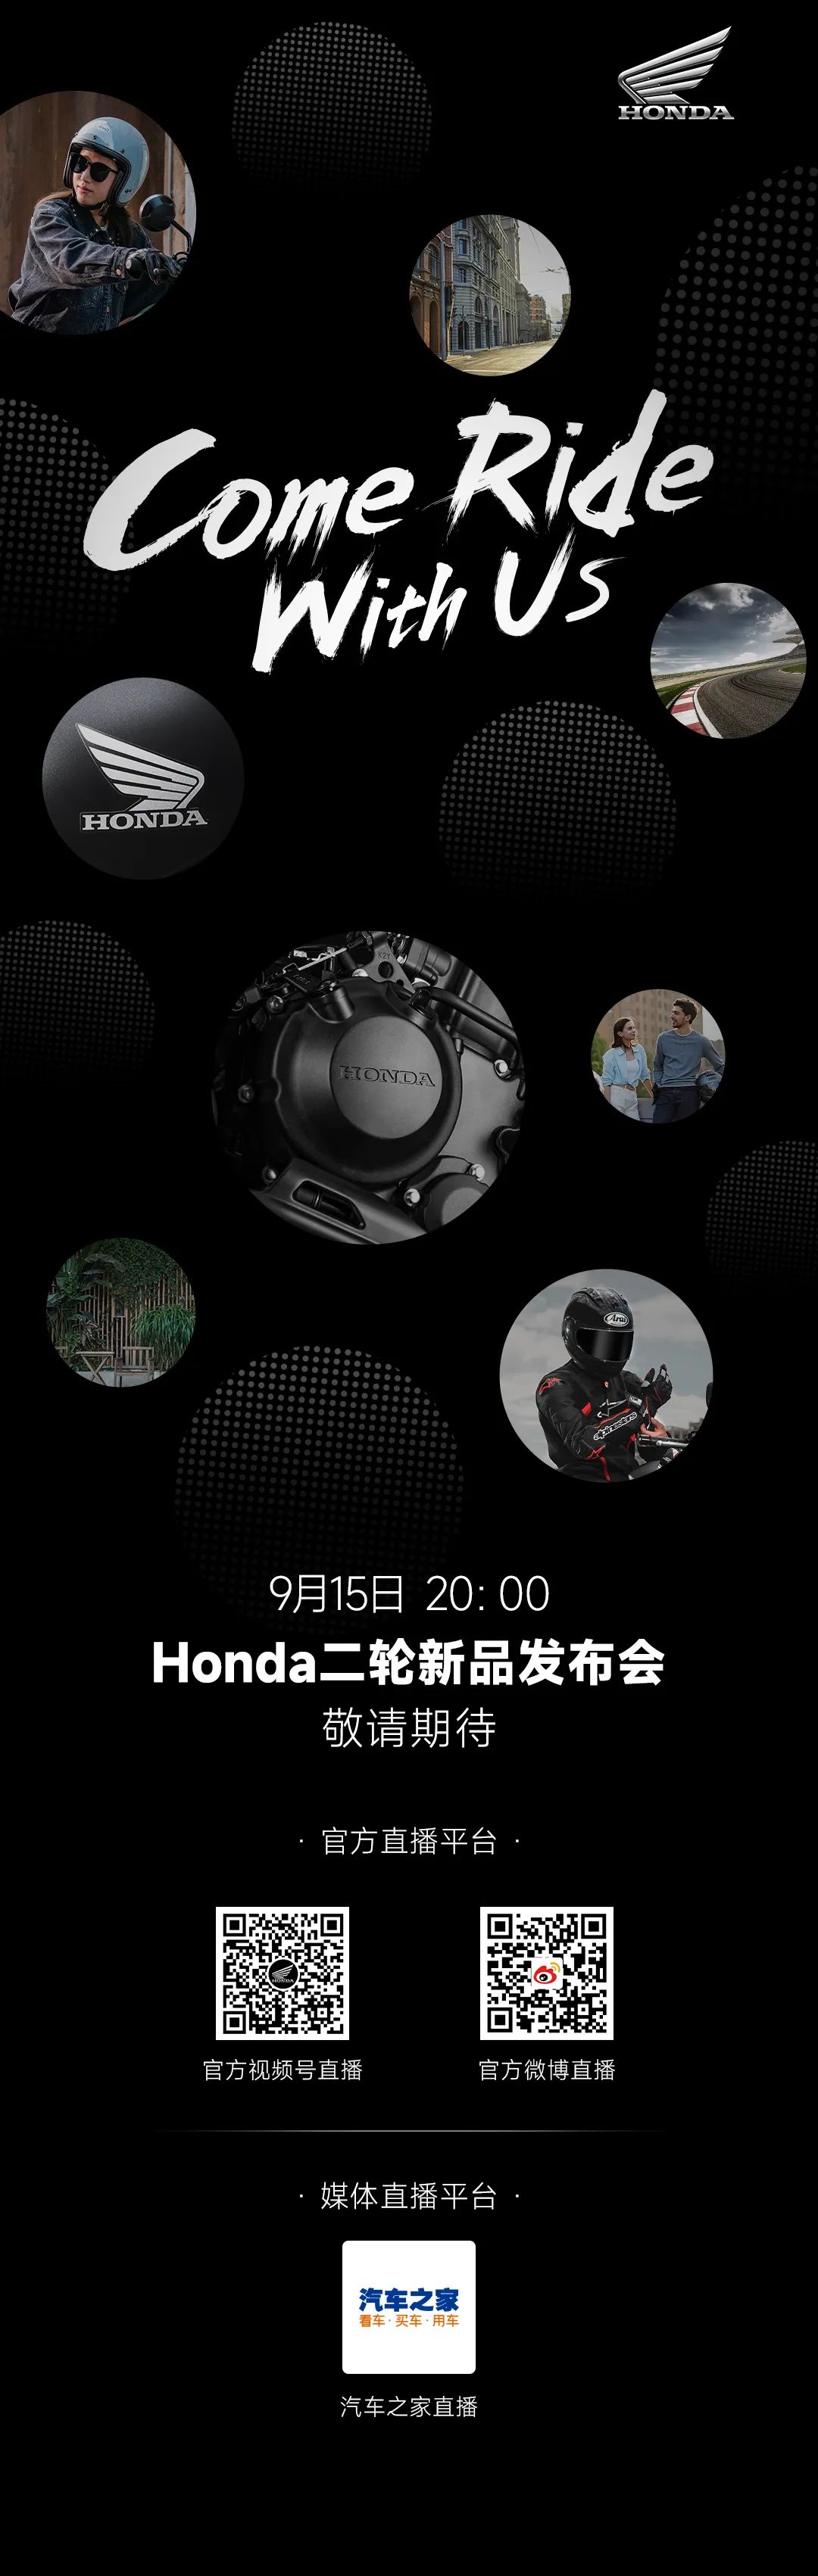 Come Ride With Us！Honda二輪新品發布會敬請期待！